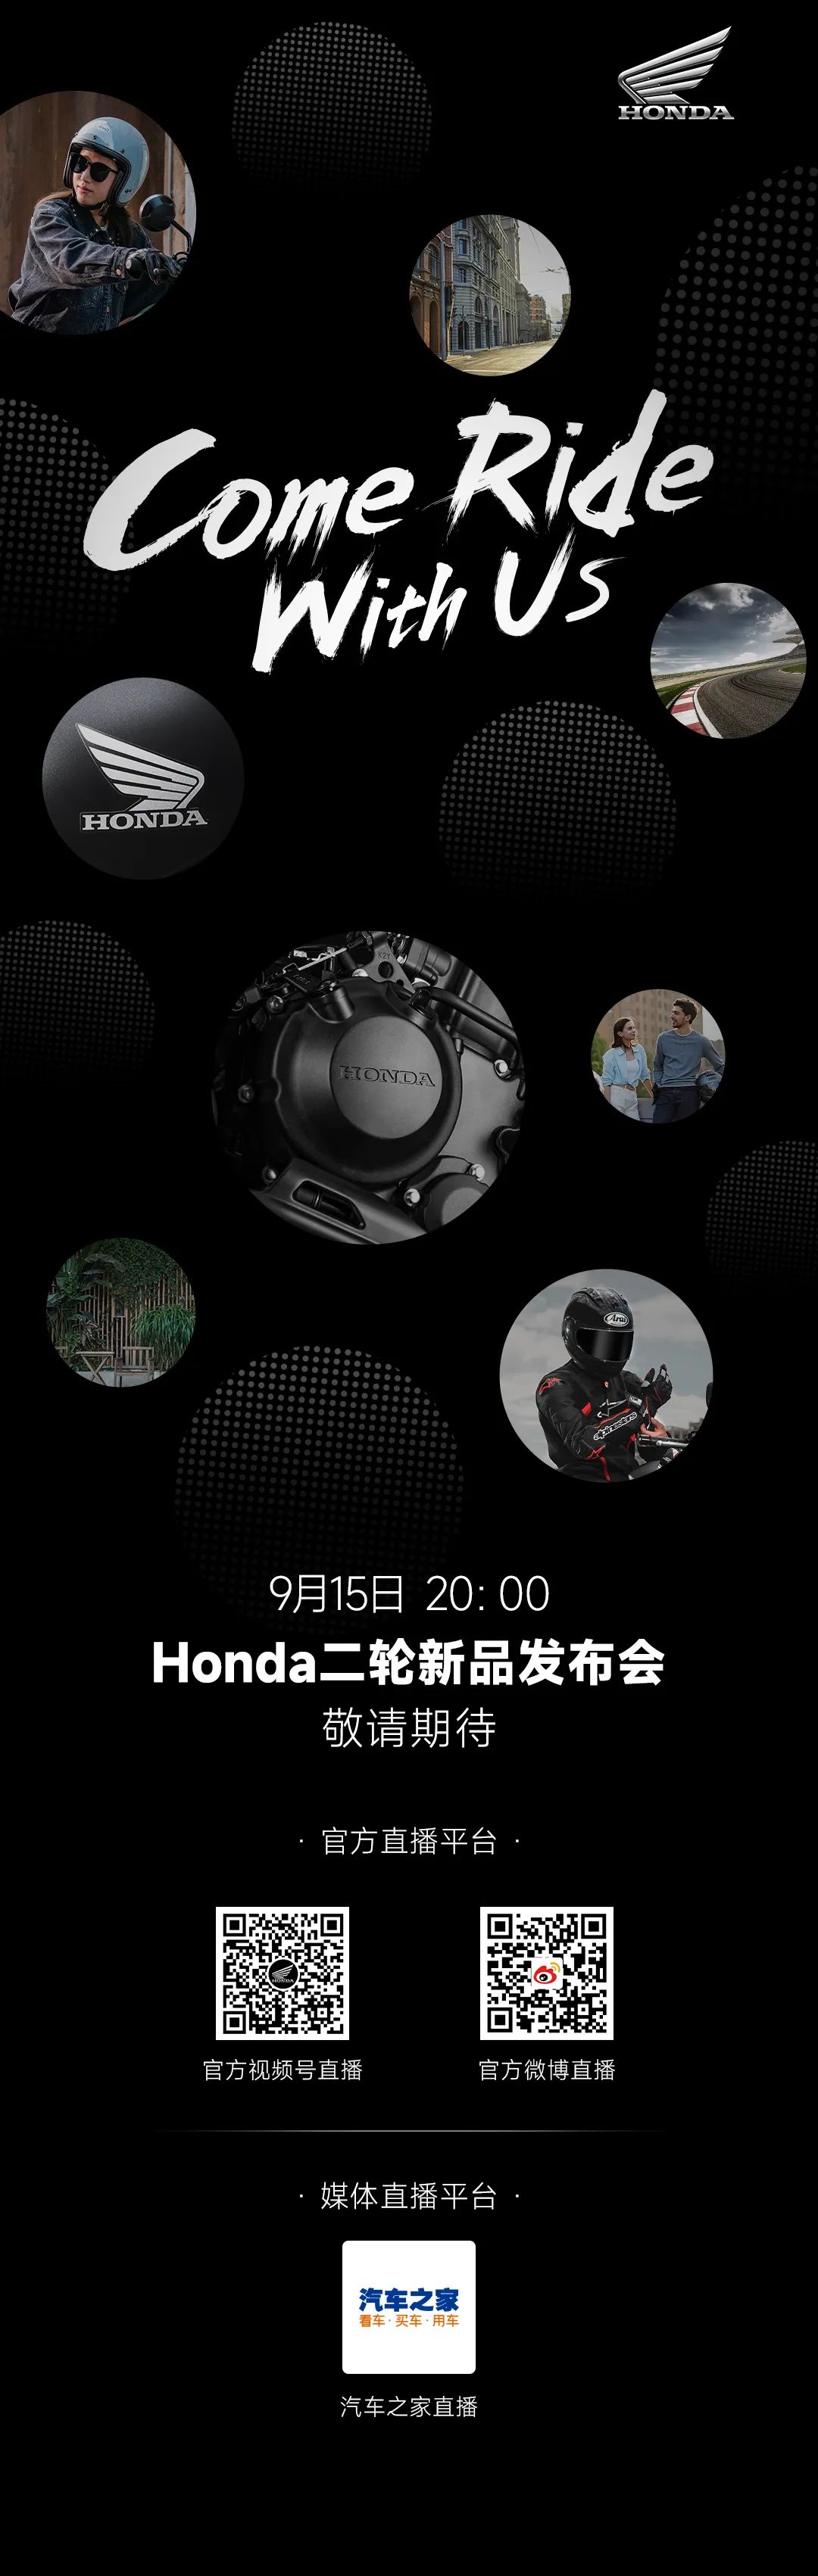 Come Ride With Us！Honda二輪新品發布會敬請期待！